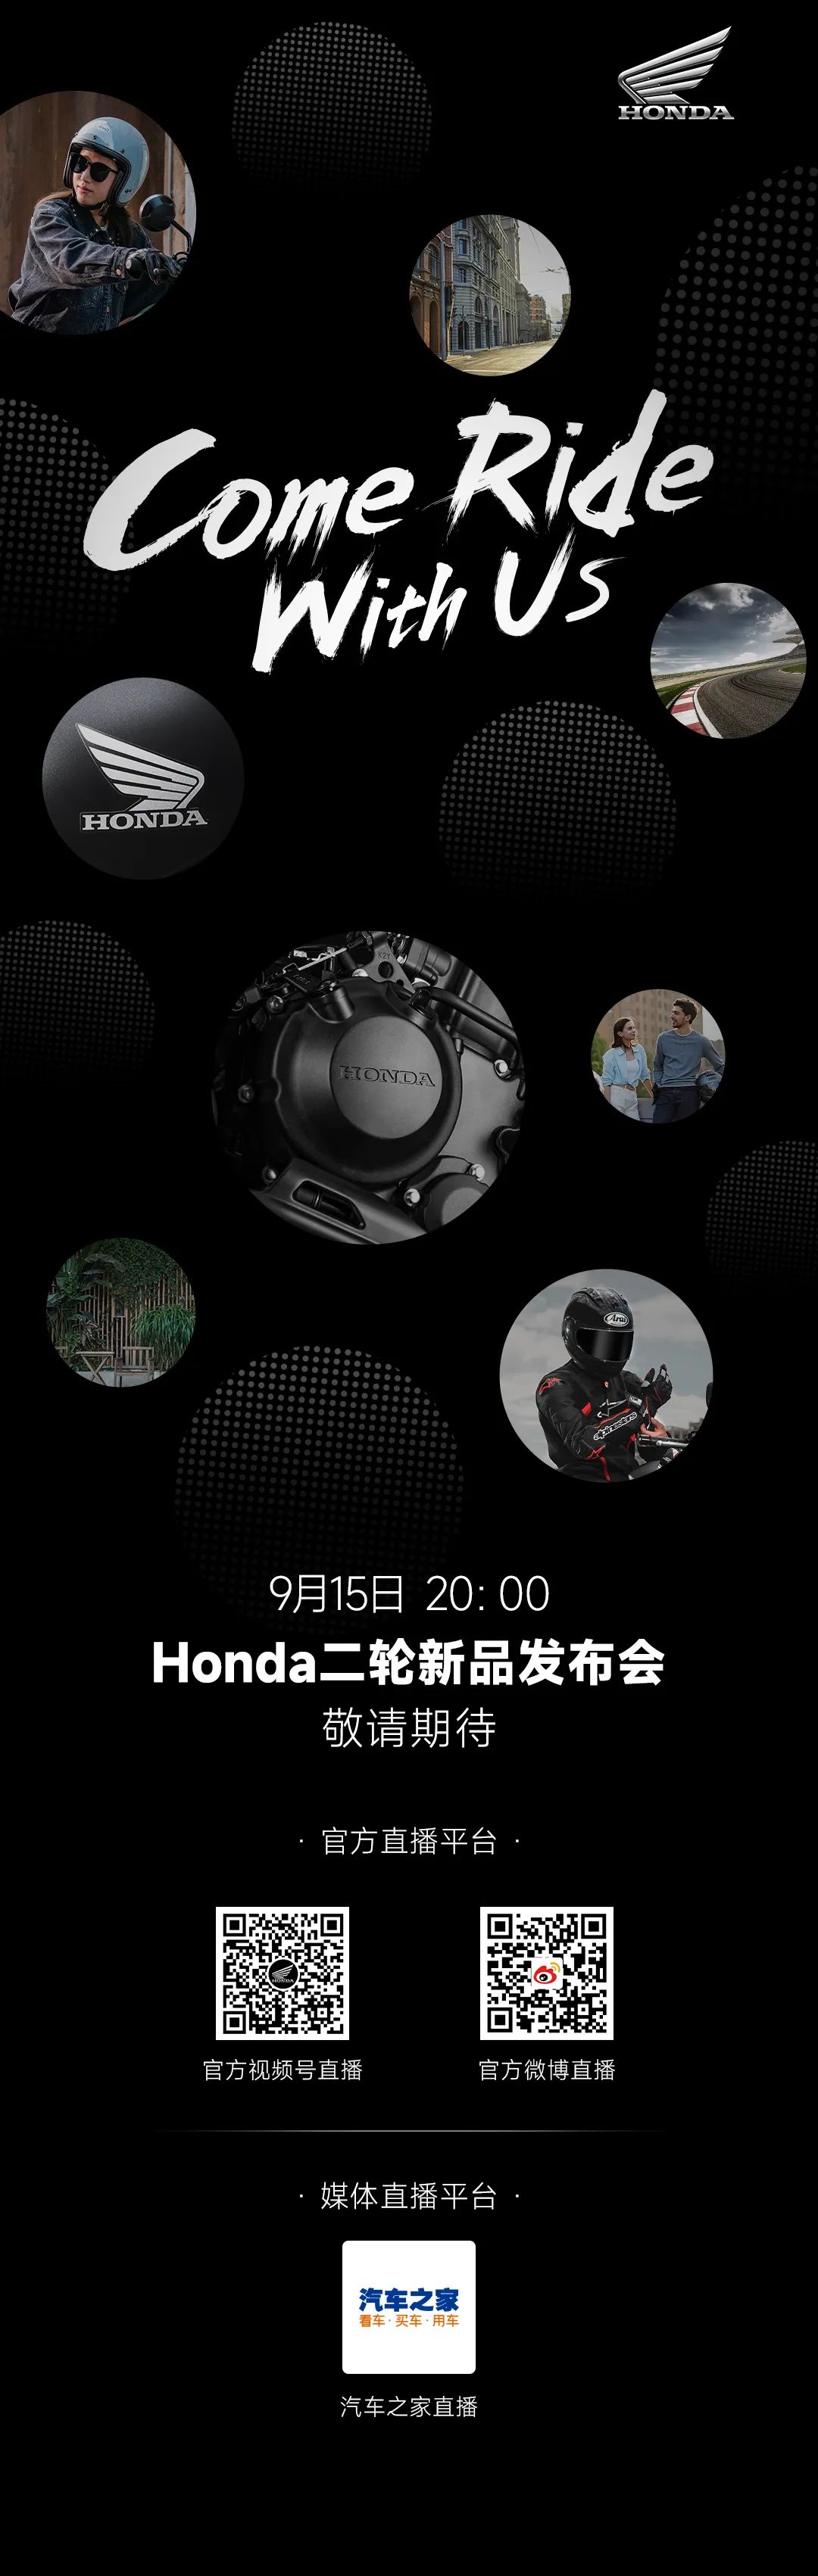 Come Ride With Us！Honda二輪新品發布會敬請期待！